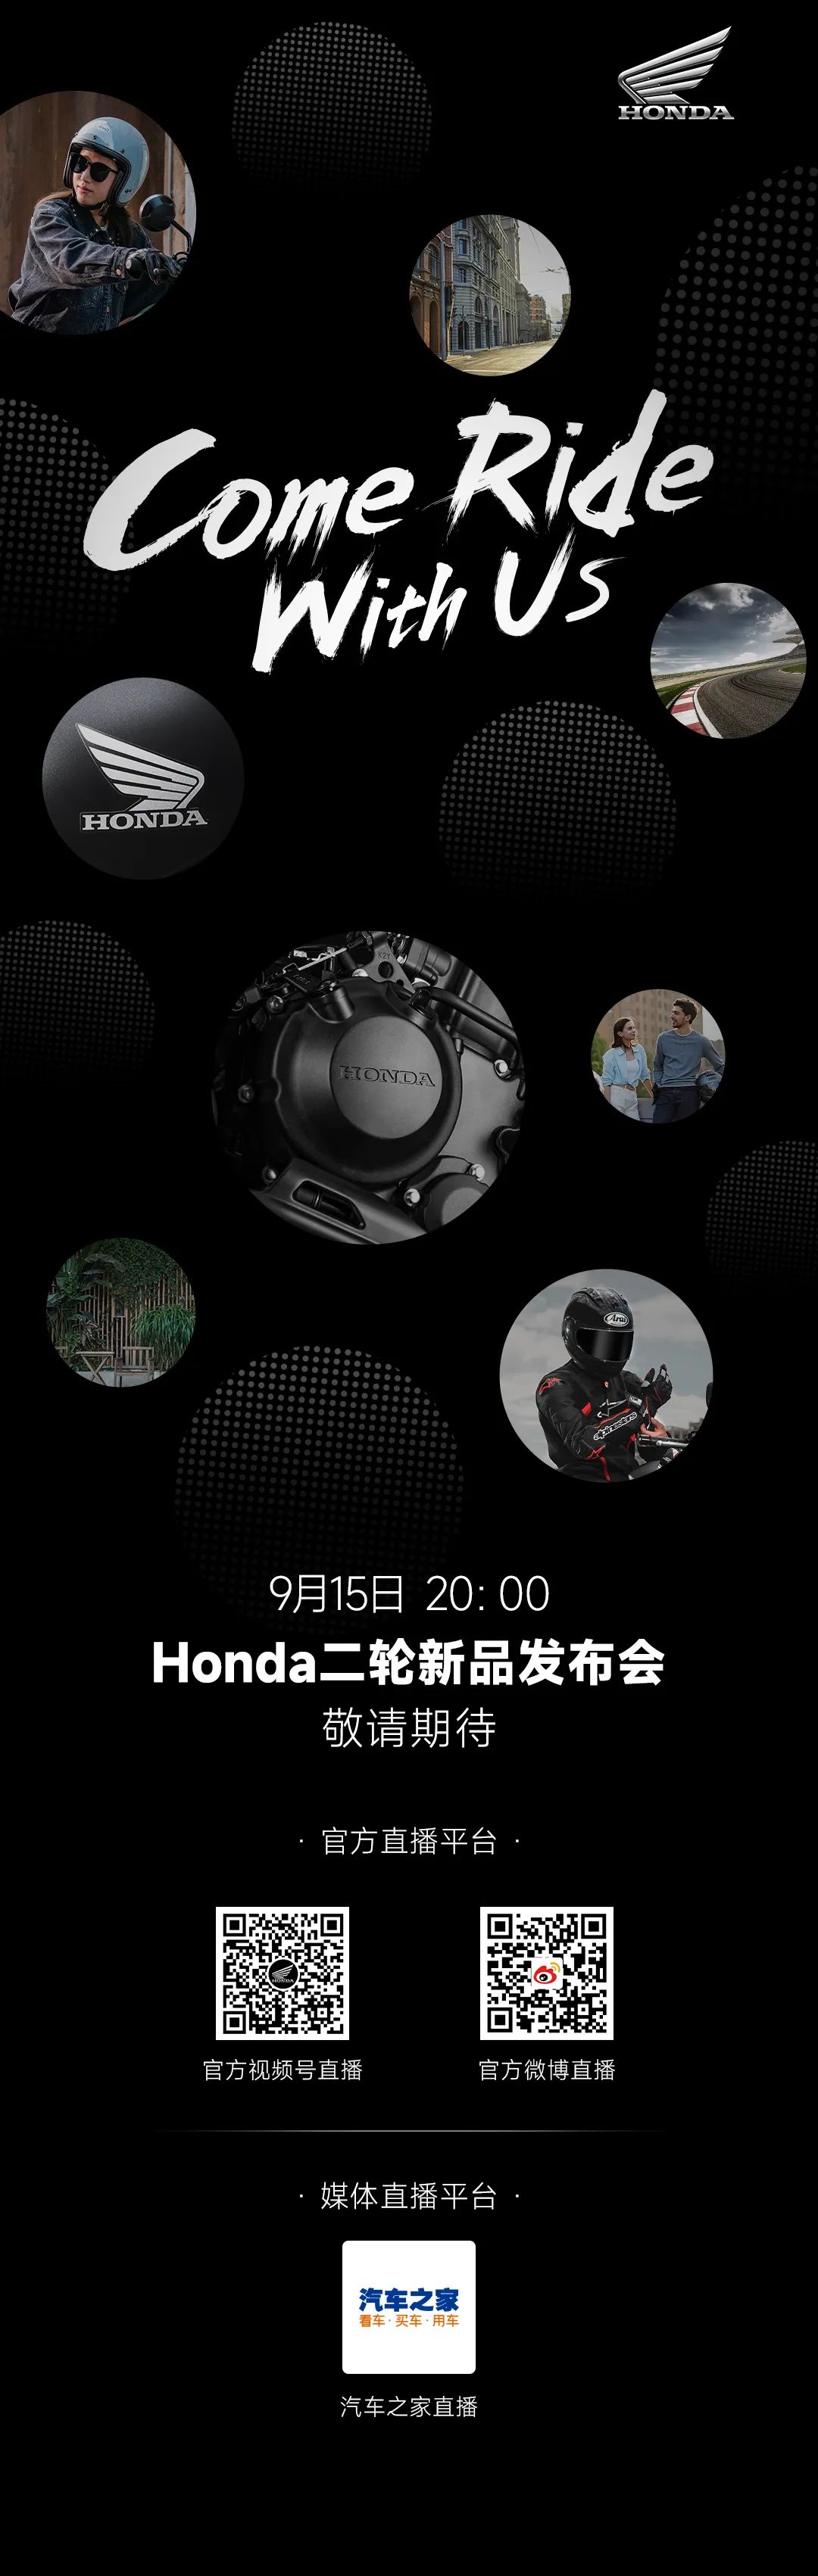 Come Ride With Us！Honda二輪新品發布會敬請期待！